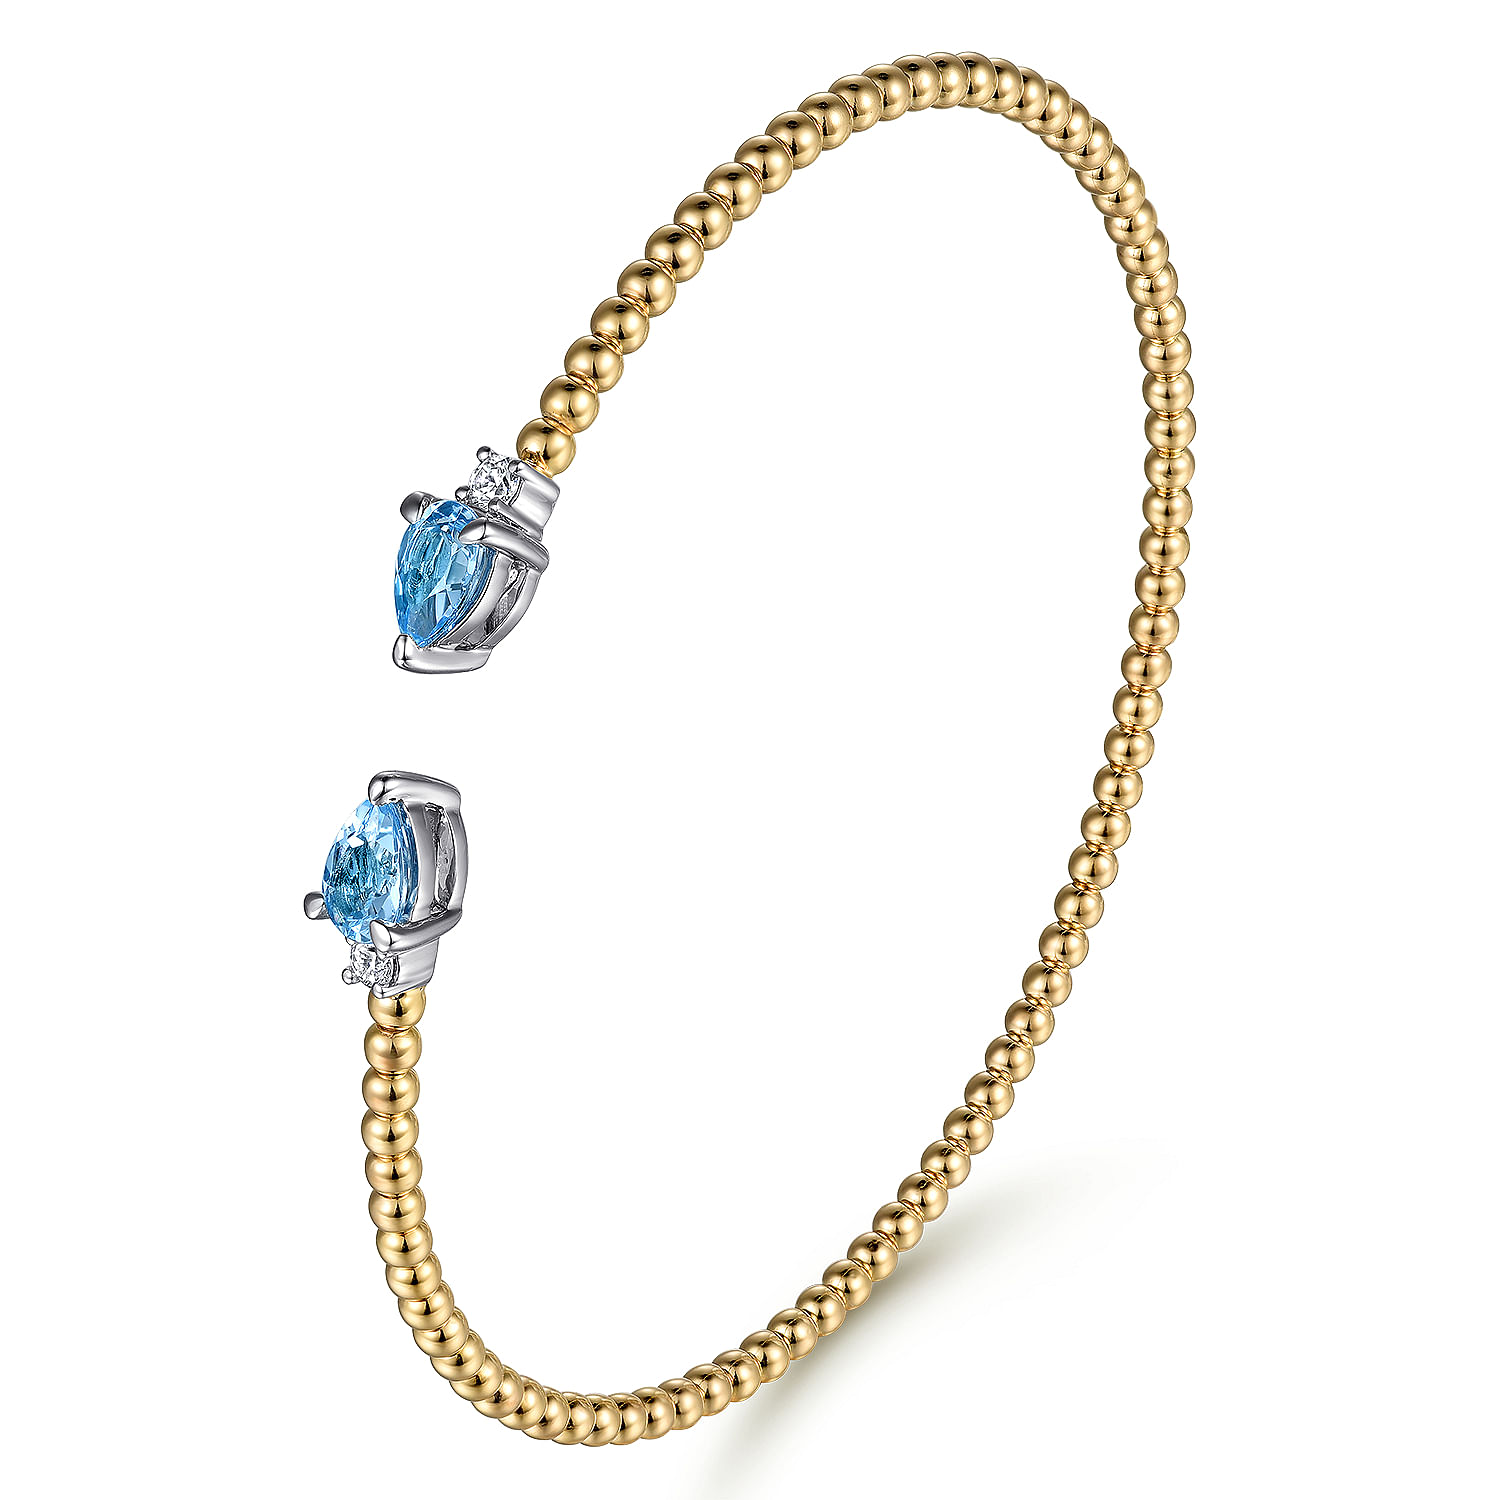 14K White & Yellow Gold Bujukan Open Cuff Bracelet with Blue Topaz and Diamond End Caps